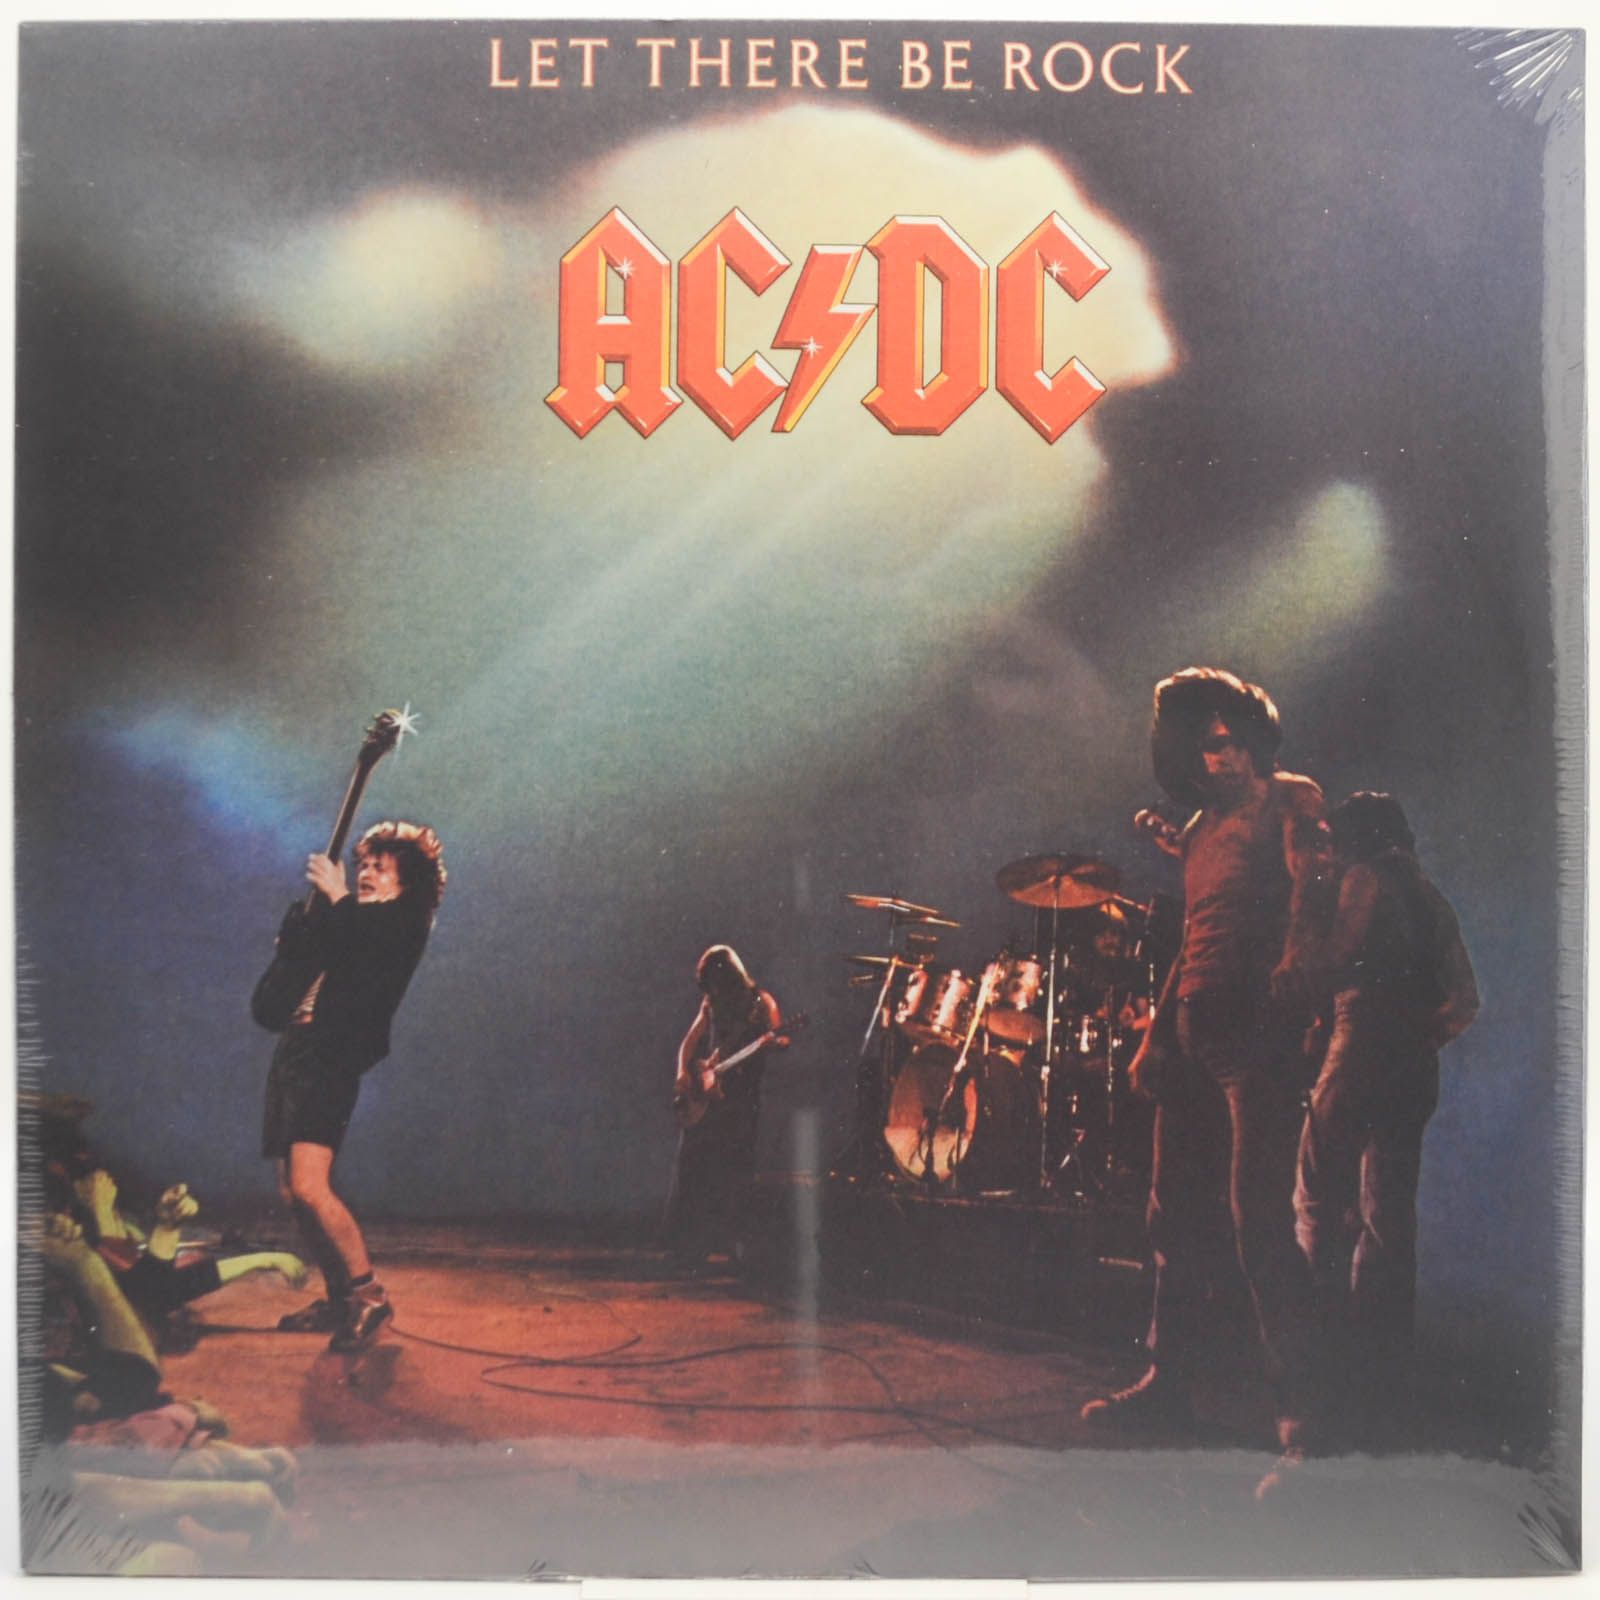 AC/DC — Let There Be Rock, 1977